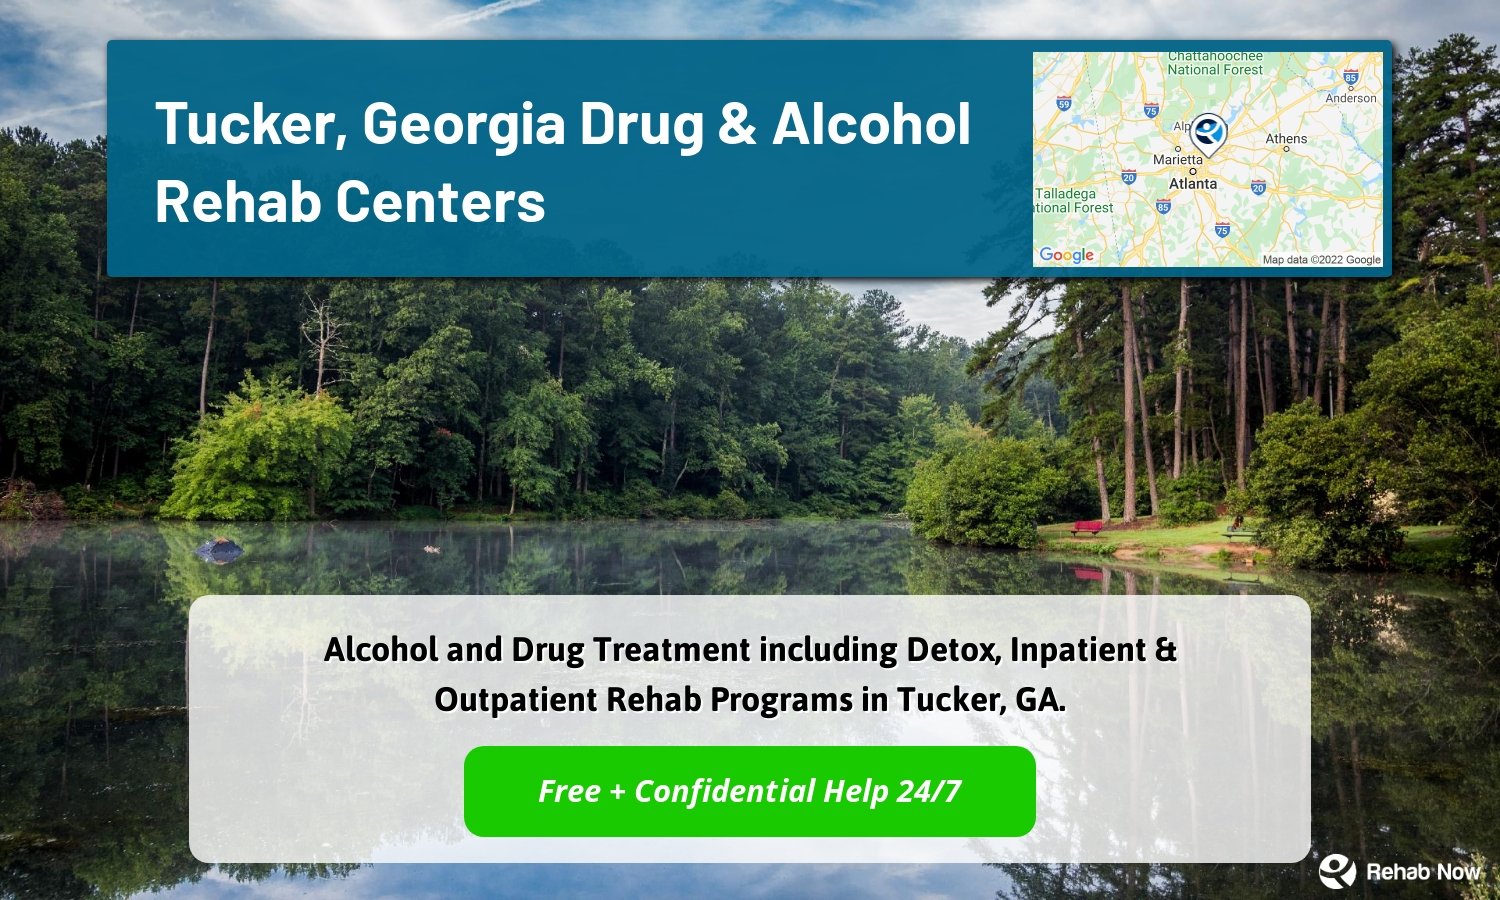 Alcohol and Drug Treatment including Detox, Inpatient & Outpatient Rehab Programs in Tucker, GA.